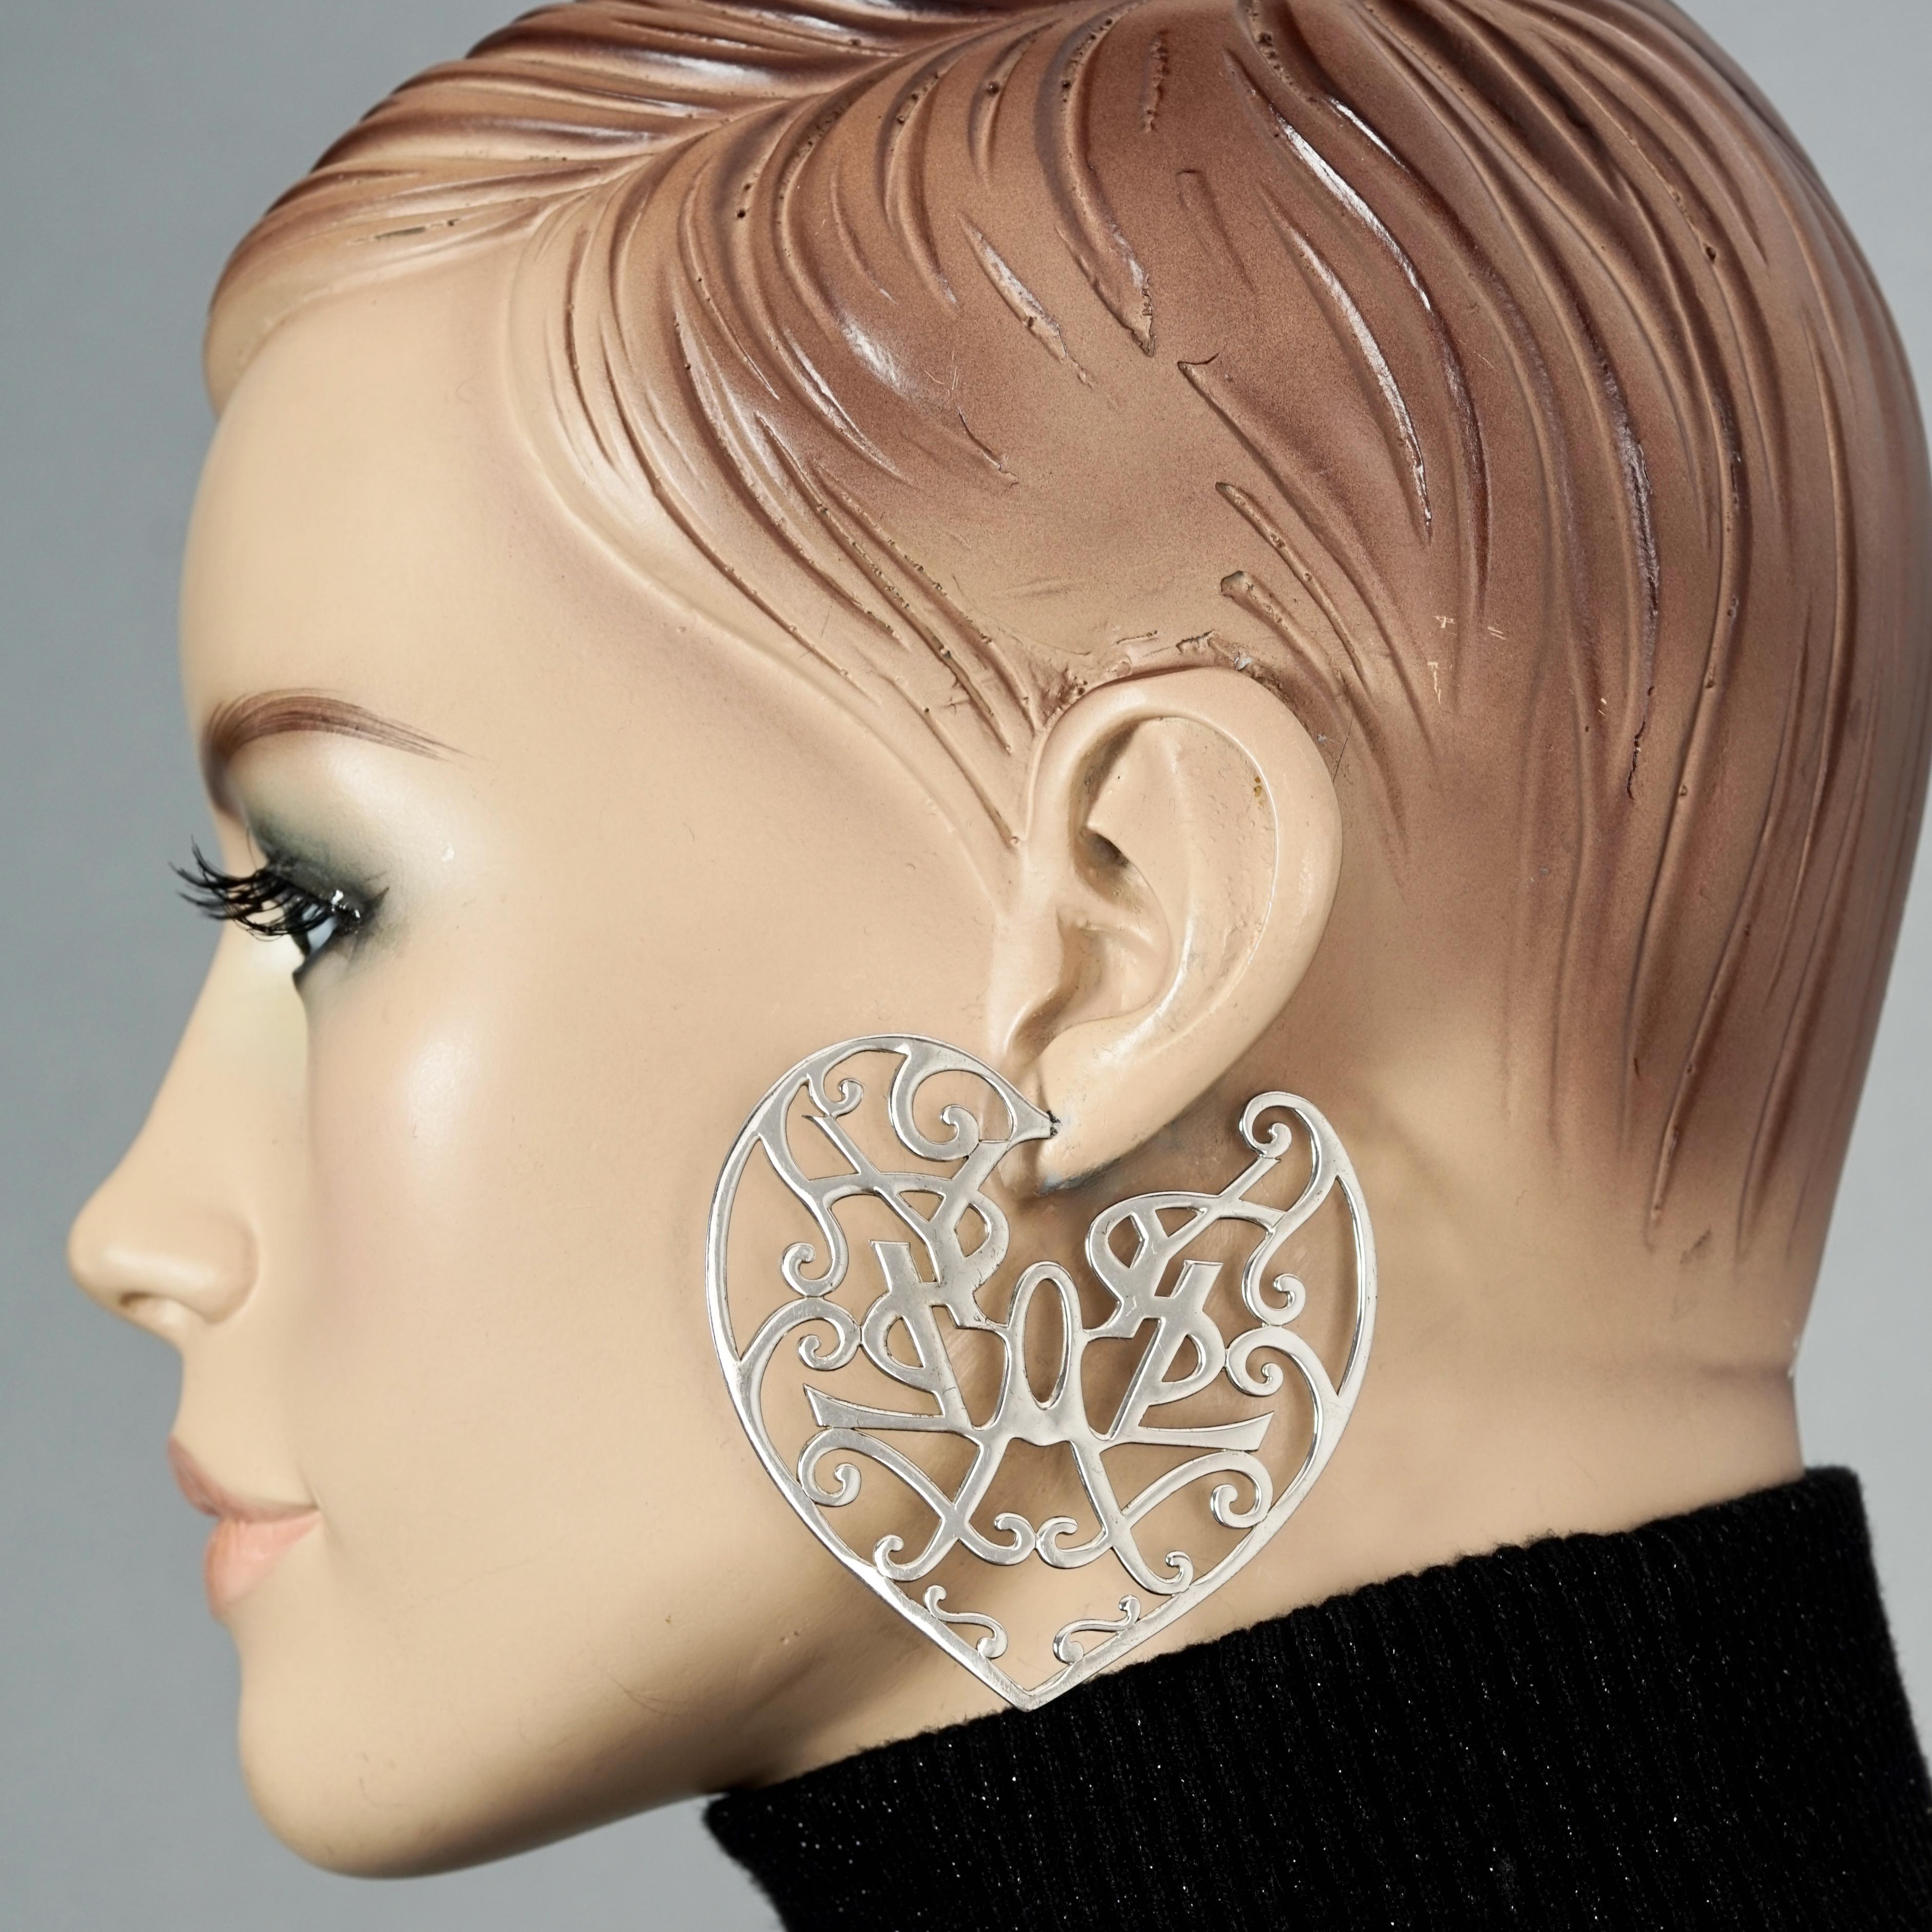 Vintage YVES SAINT LAURENT Ysl Heart Logo Abstract Openwork Hoop Silver Earrings

Measurements:
Height: 2.48 inches (6.3 cm)
Width: 2.63 inches (6.7 cm)
Weight per Earring: 13 grams

Features:
- 100% Authentic YVES SAINT LAURENT.
- Massive creole